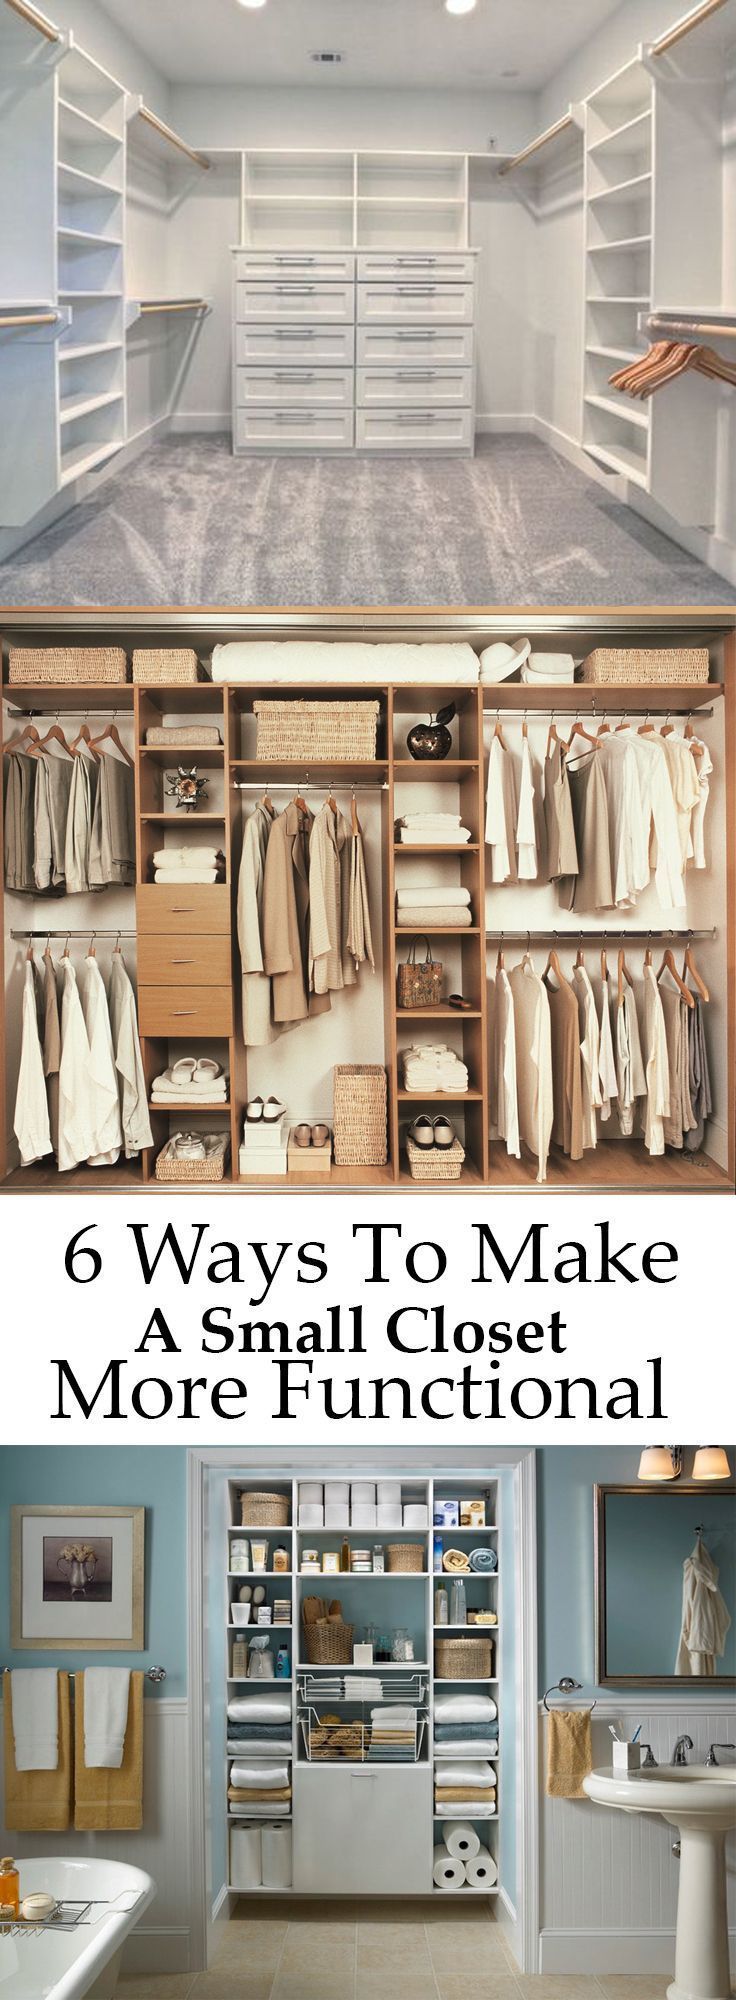 6 Ways To Make A Small Closet More Functional